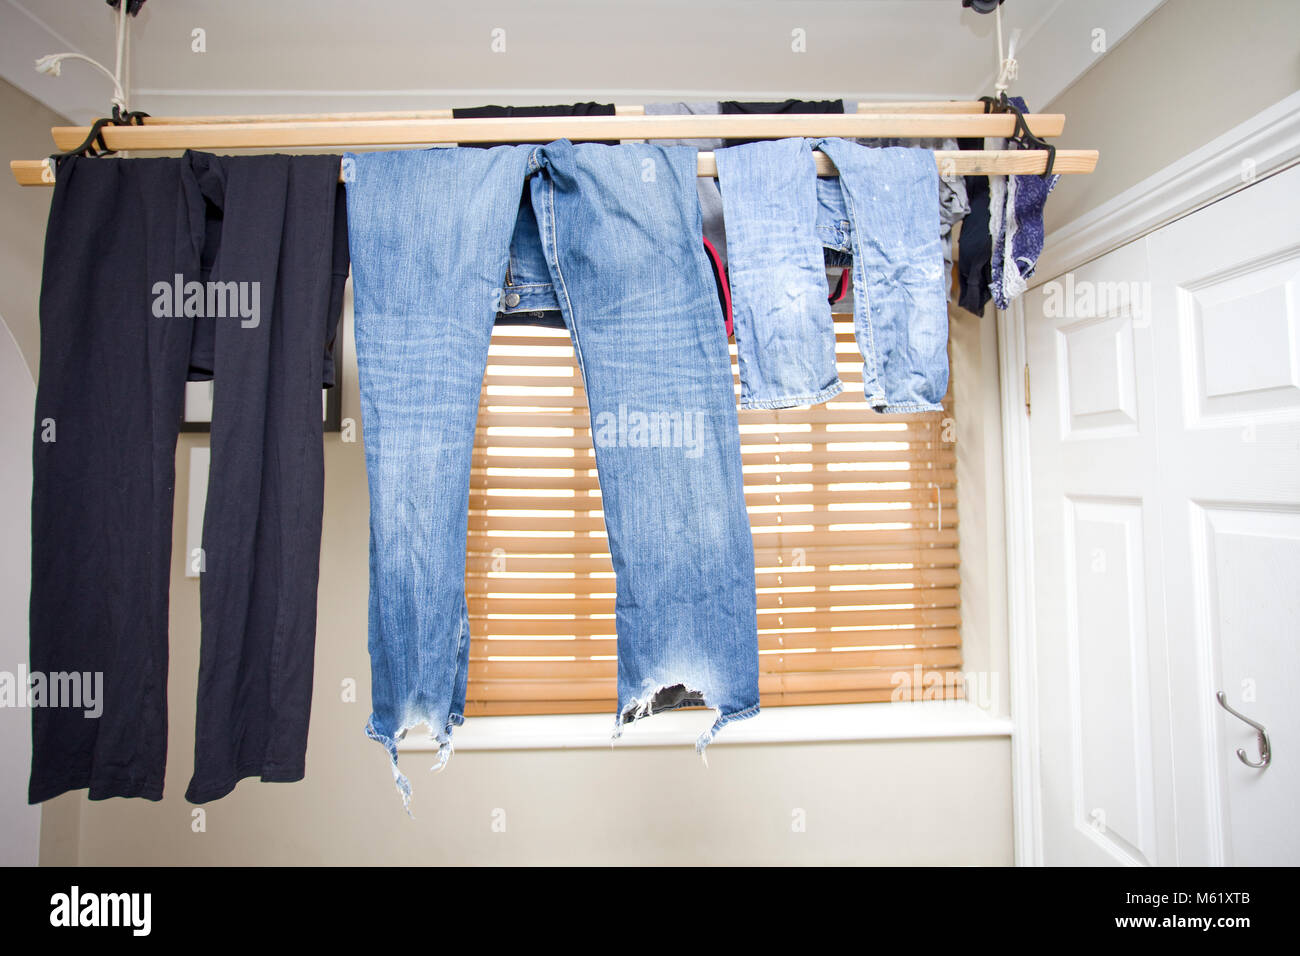 clothes drying inside home Stock Photo